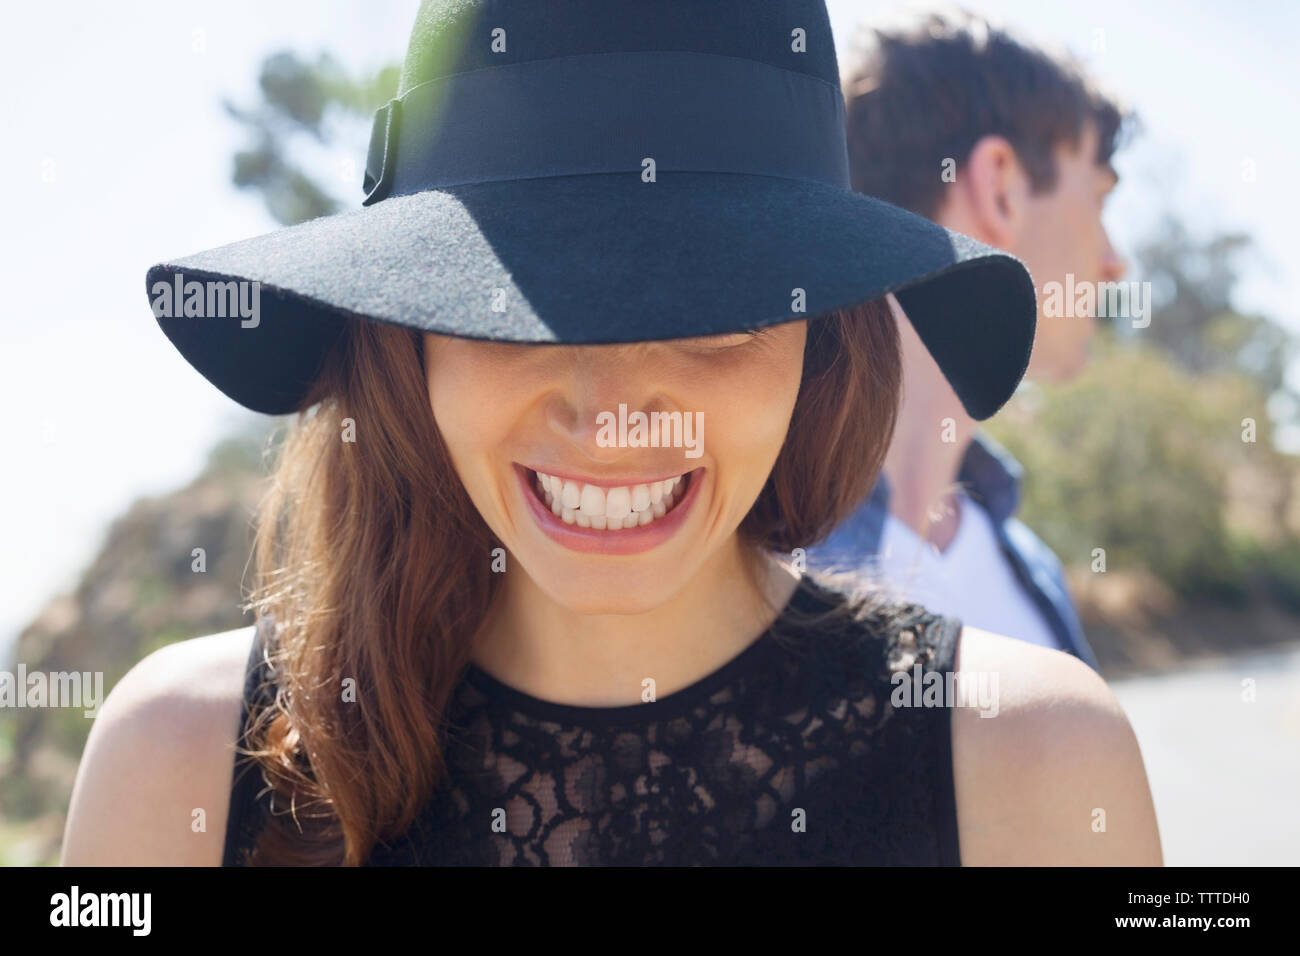 Close-up of happy woman wearing black hat with male friend in background Stock Photo